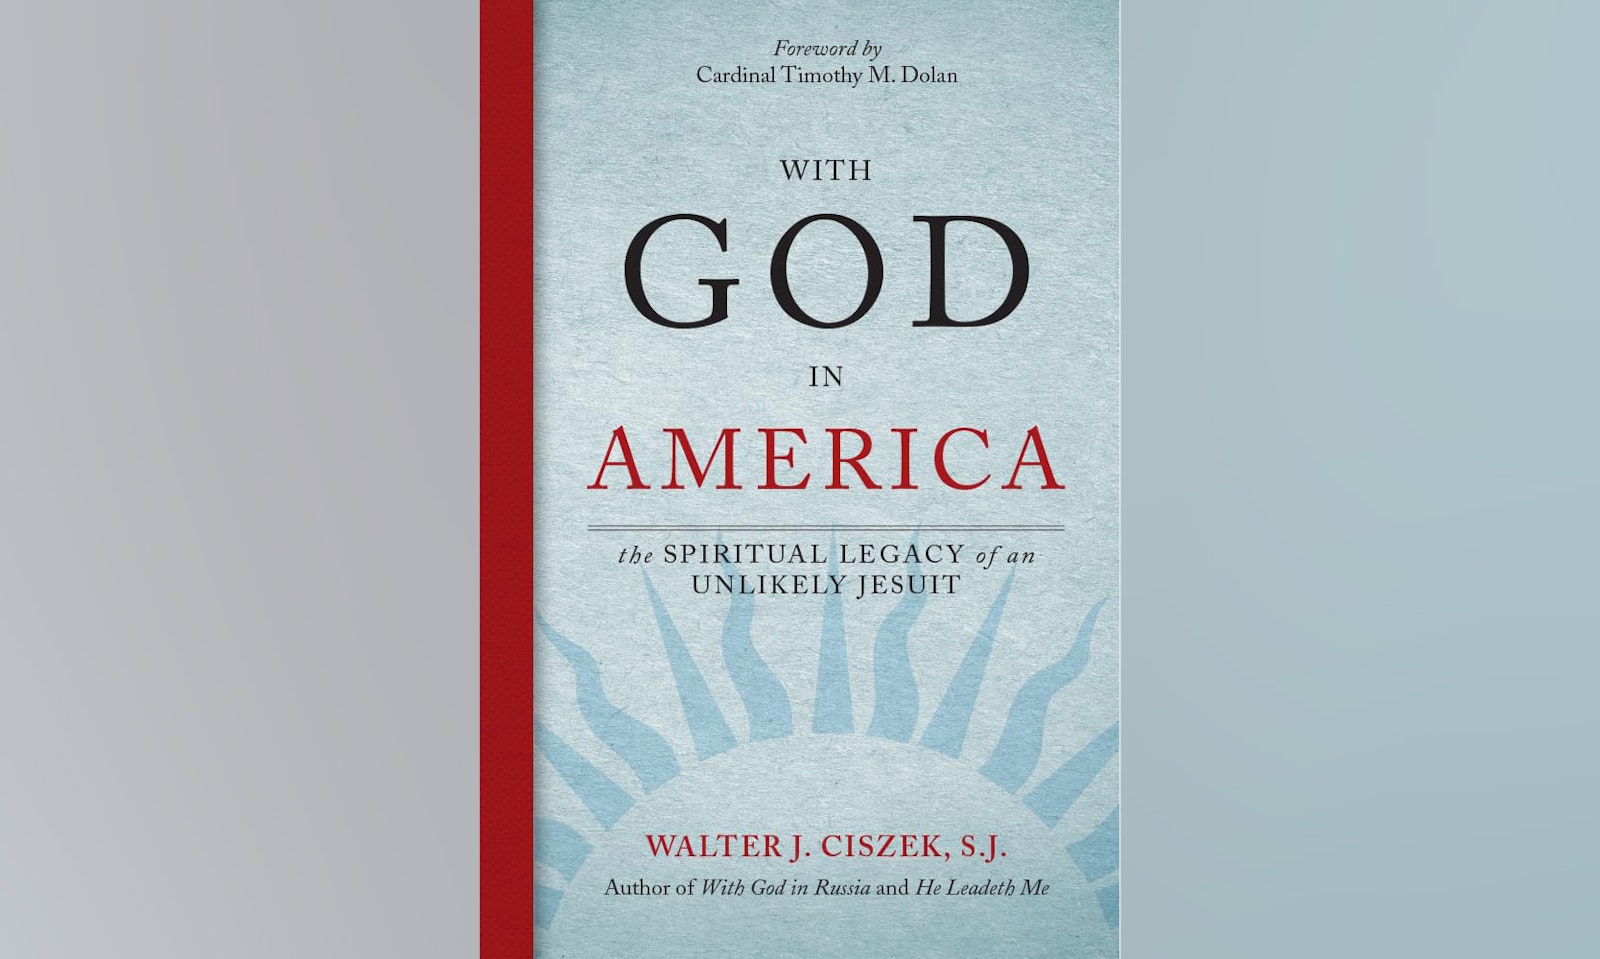 Fr. Ciszek's third book, published posthumously in 2016, details the Polish Jesuit's ministry upon his return to the United States in 1963 after his imprisonment.